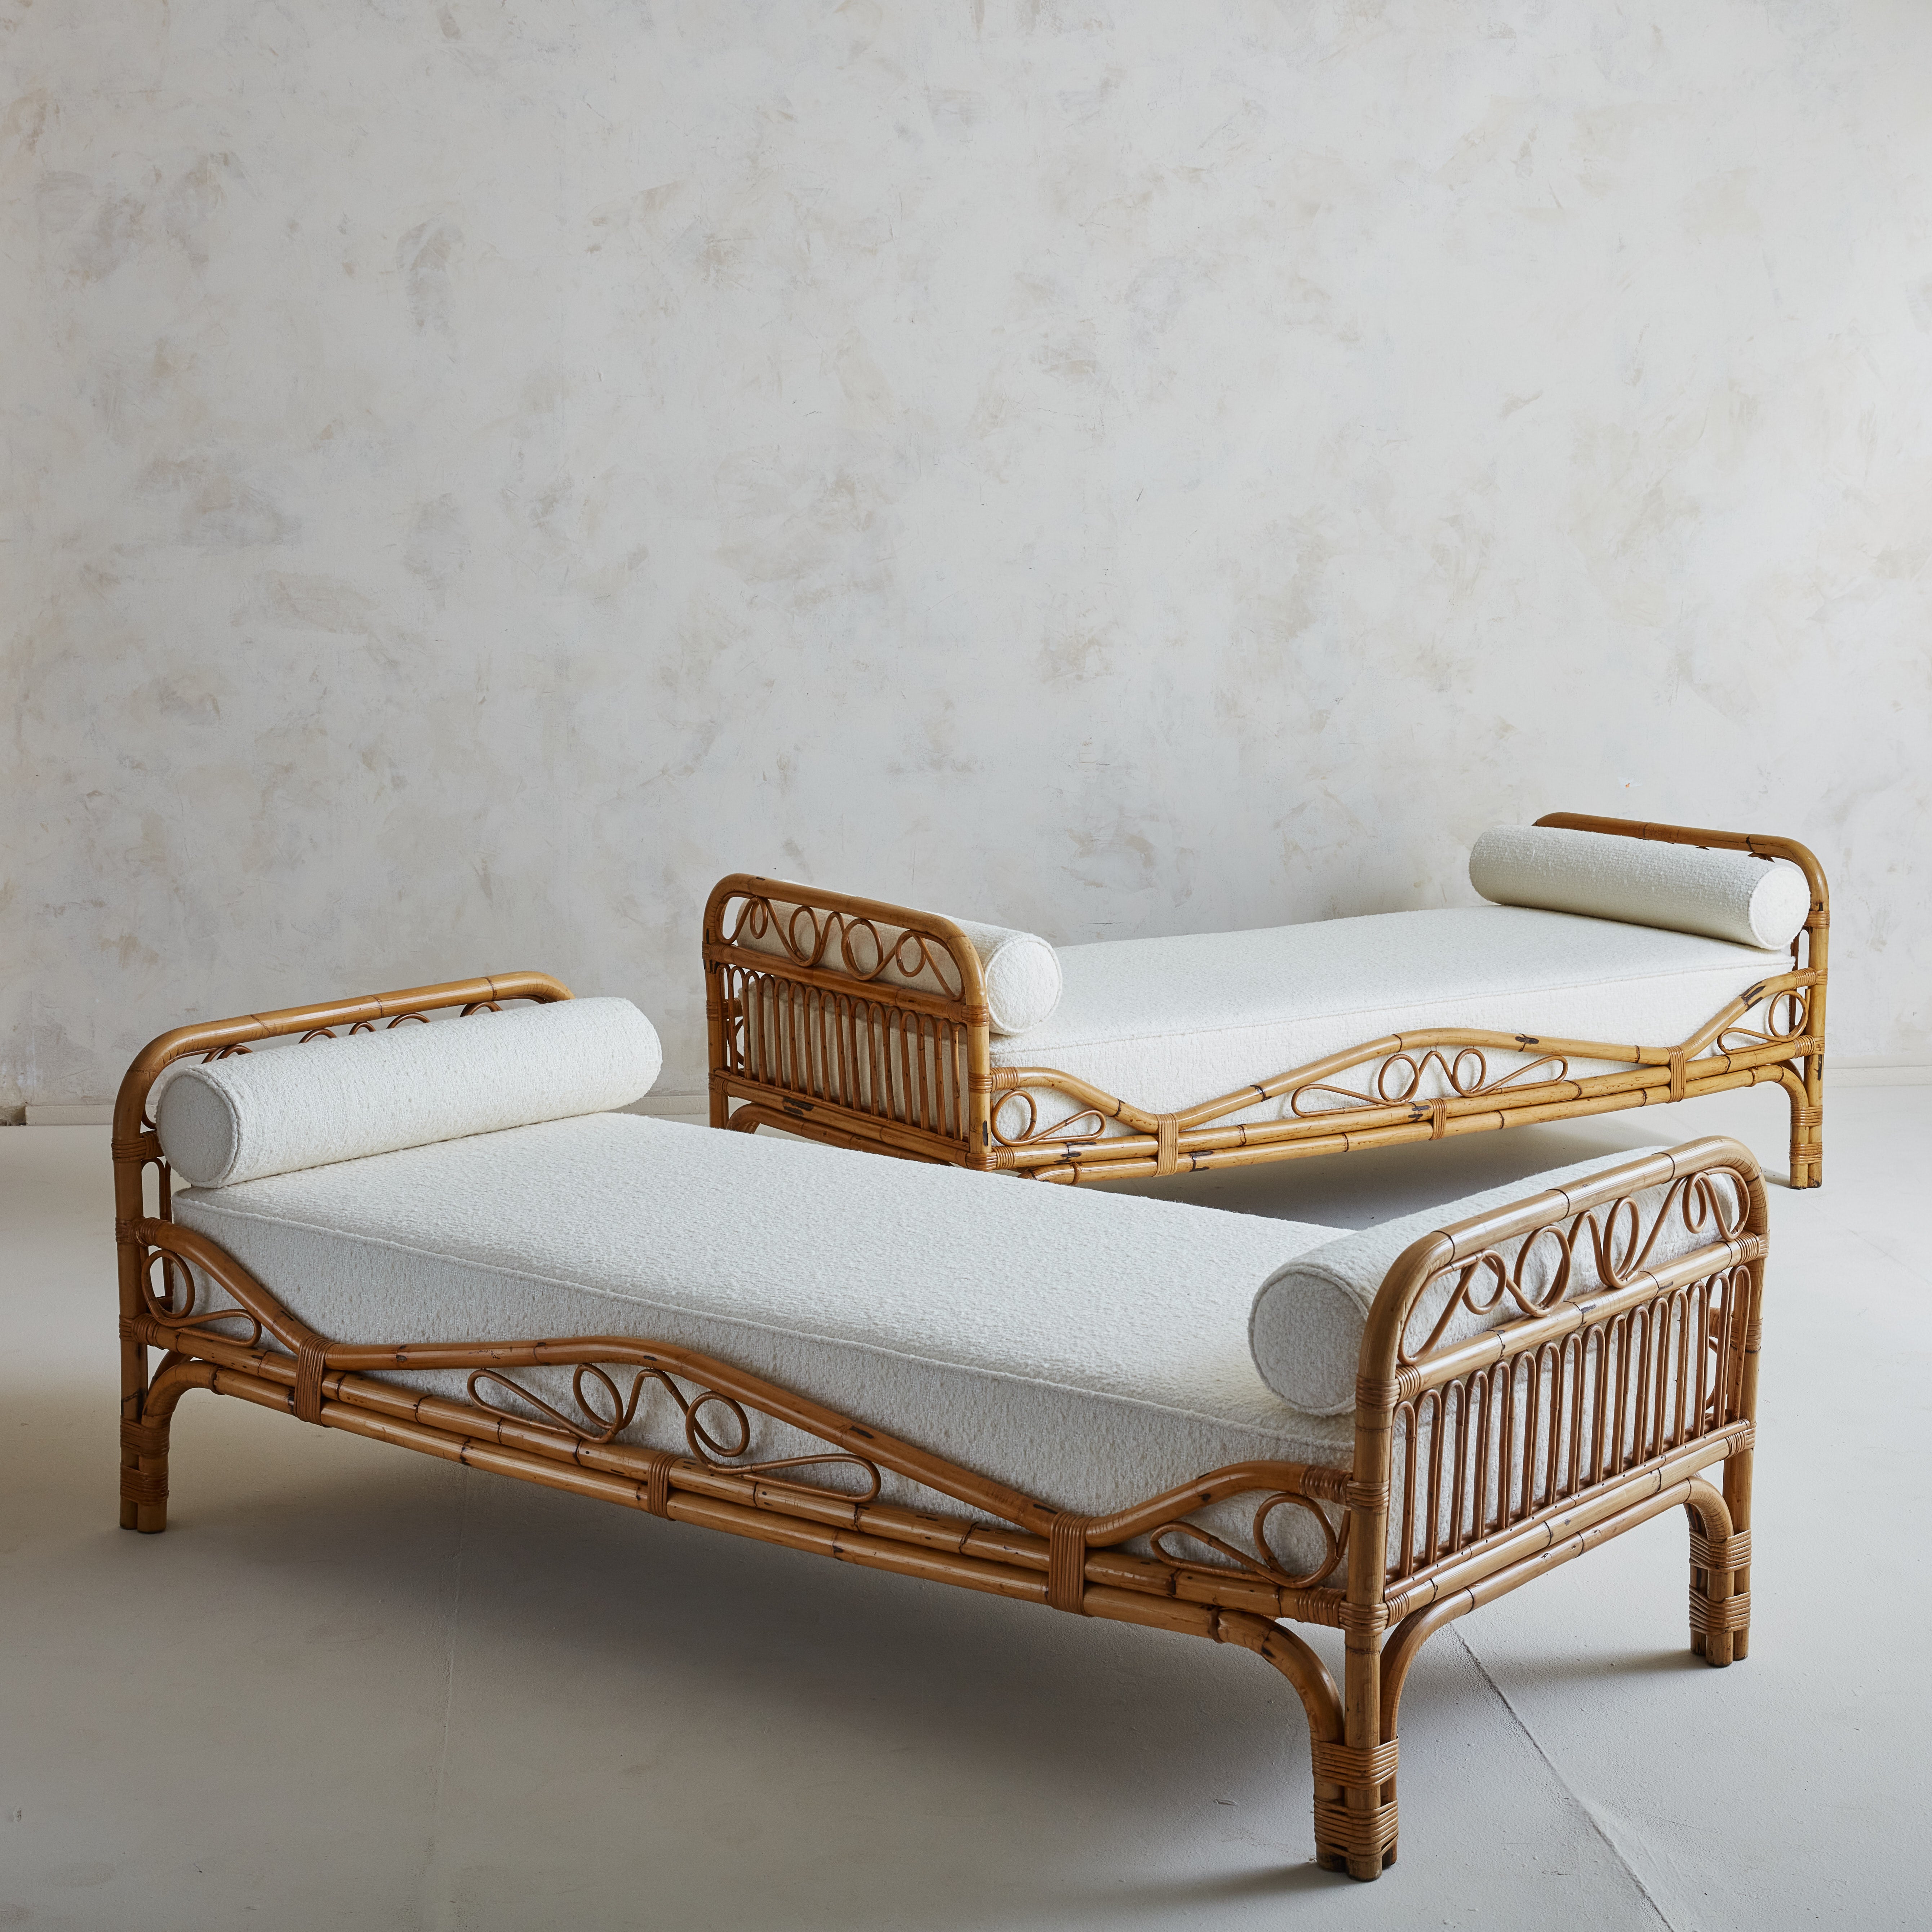  A comfy + elegant Italian Bamboo daybed sourced in Northern Italy. The bamboo structure is formed made by steam bending and is an Italian technique employed by  mid-century Italian designers such as Tito Agnoli and Franco Albini. This features a